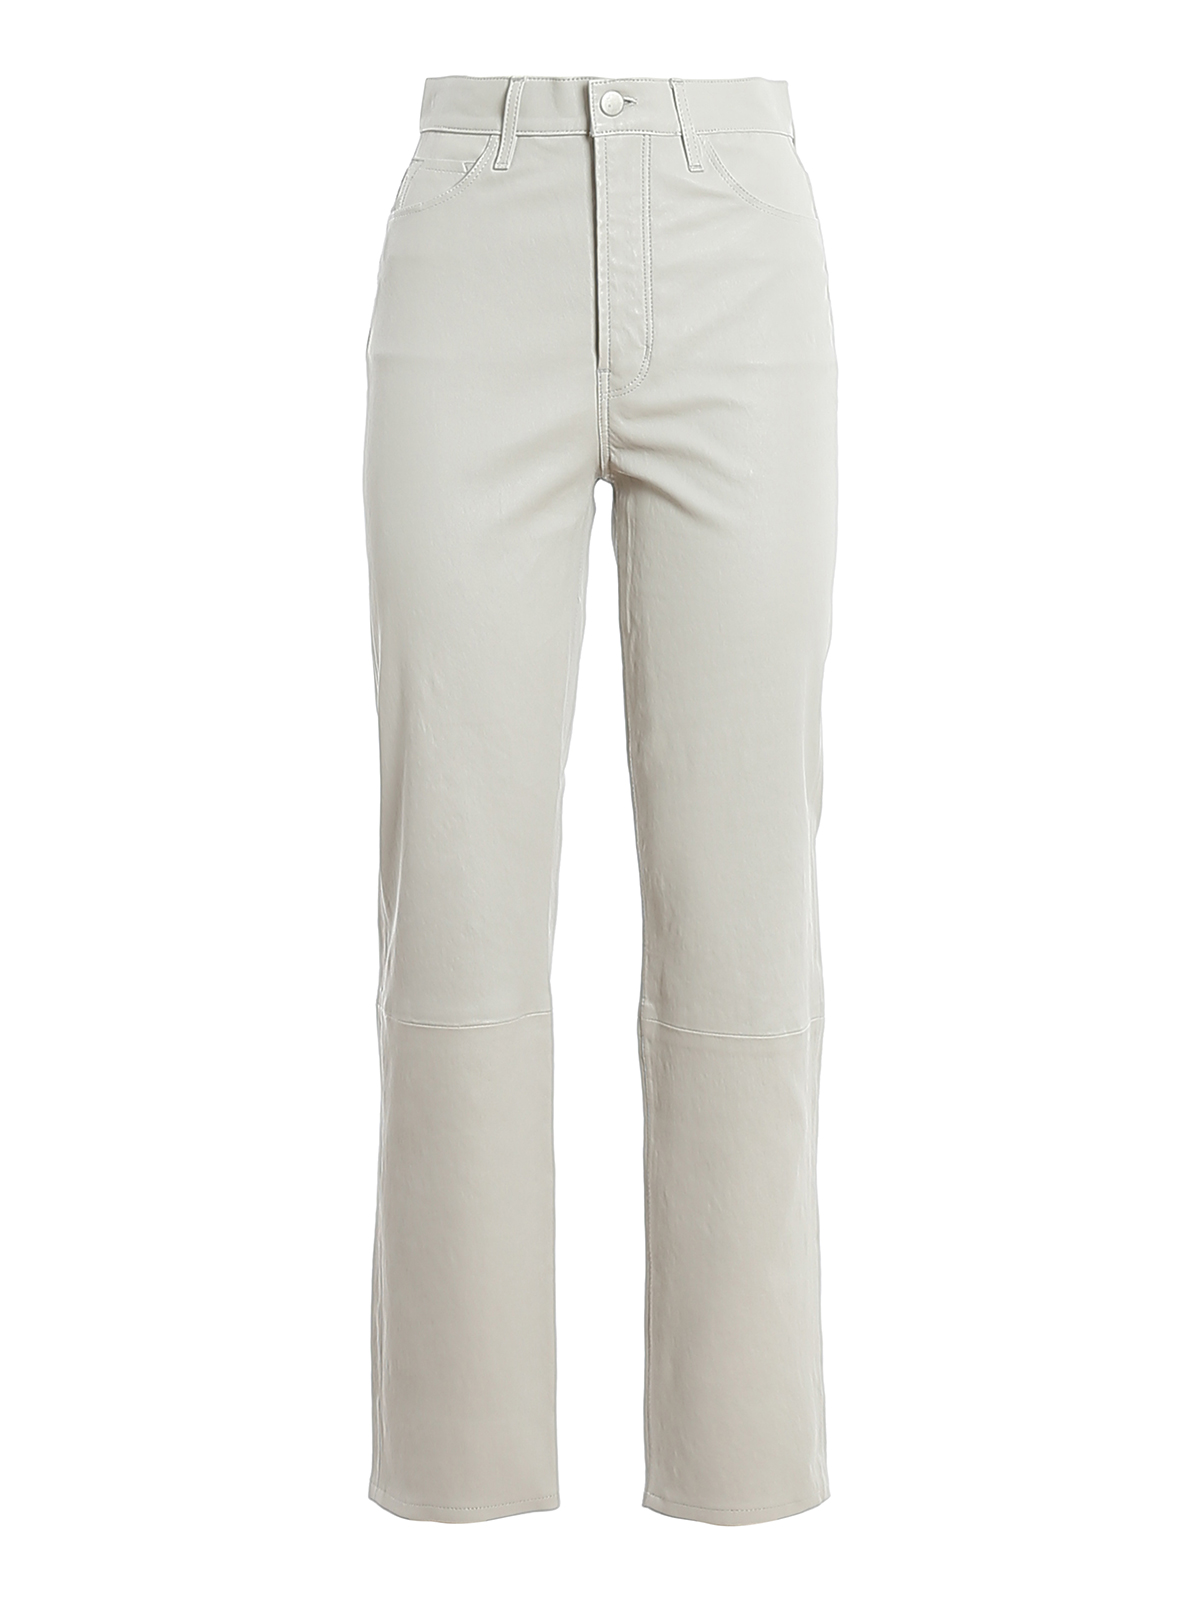 J Brand Jules Leather Pants In Light Grey